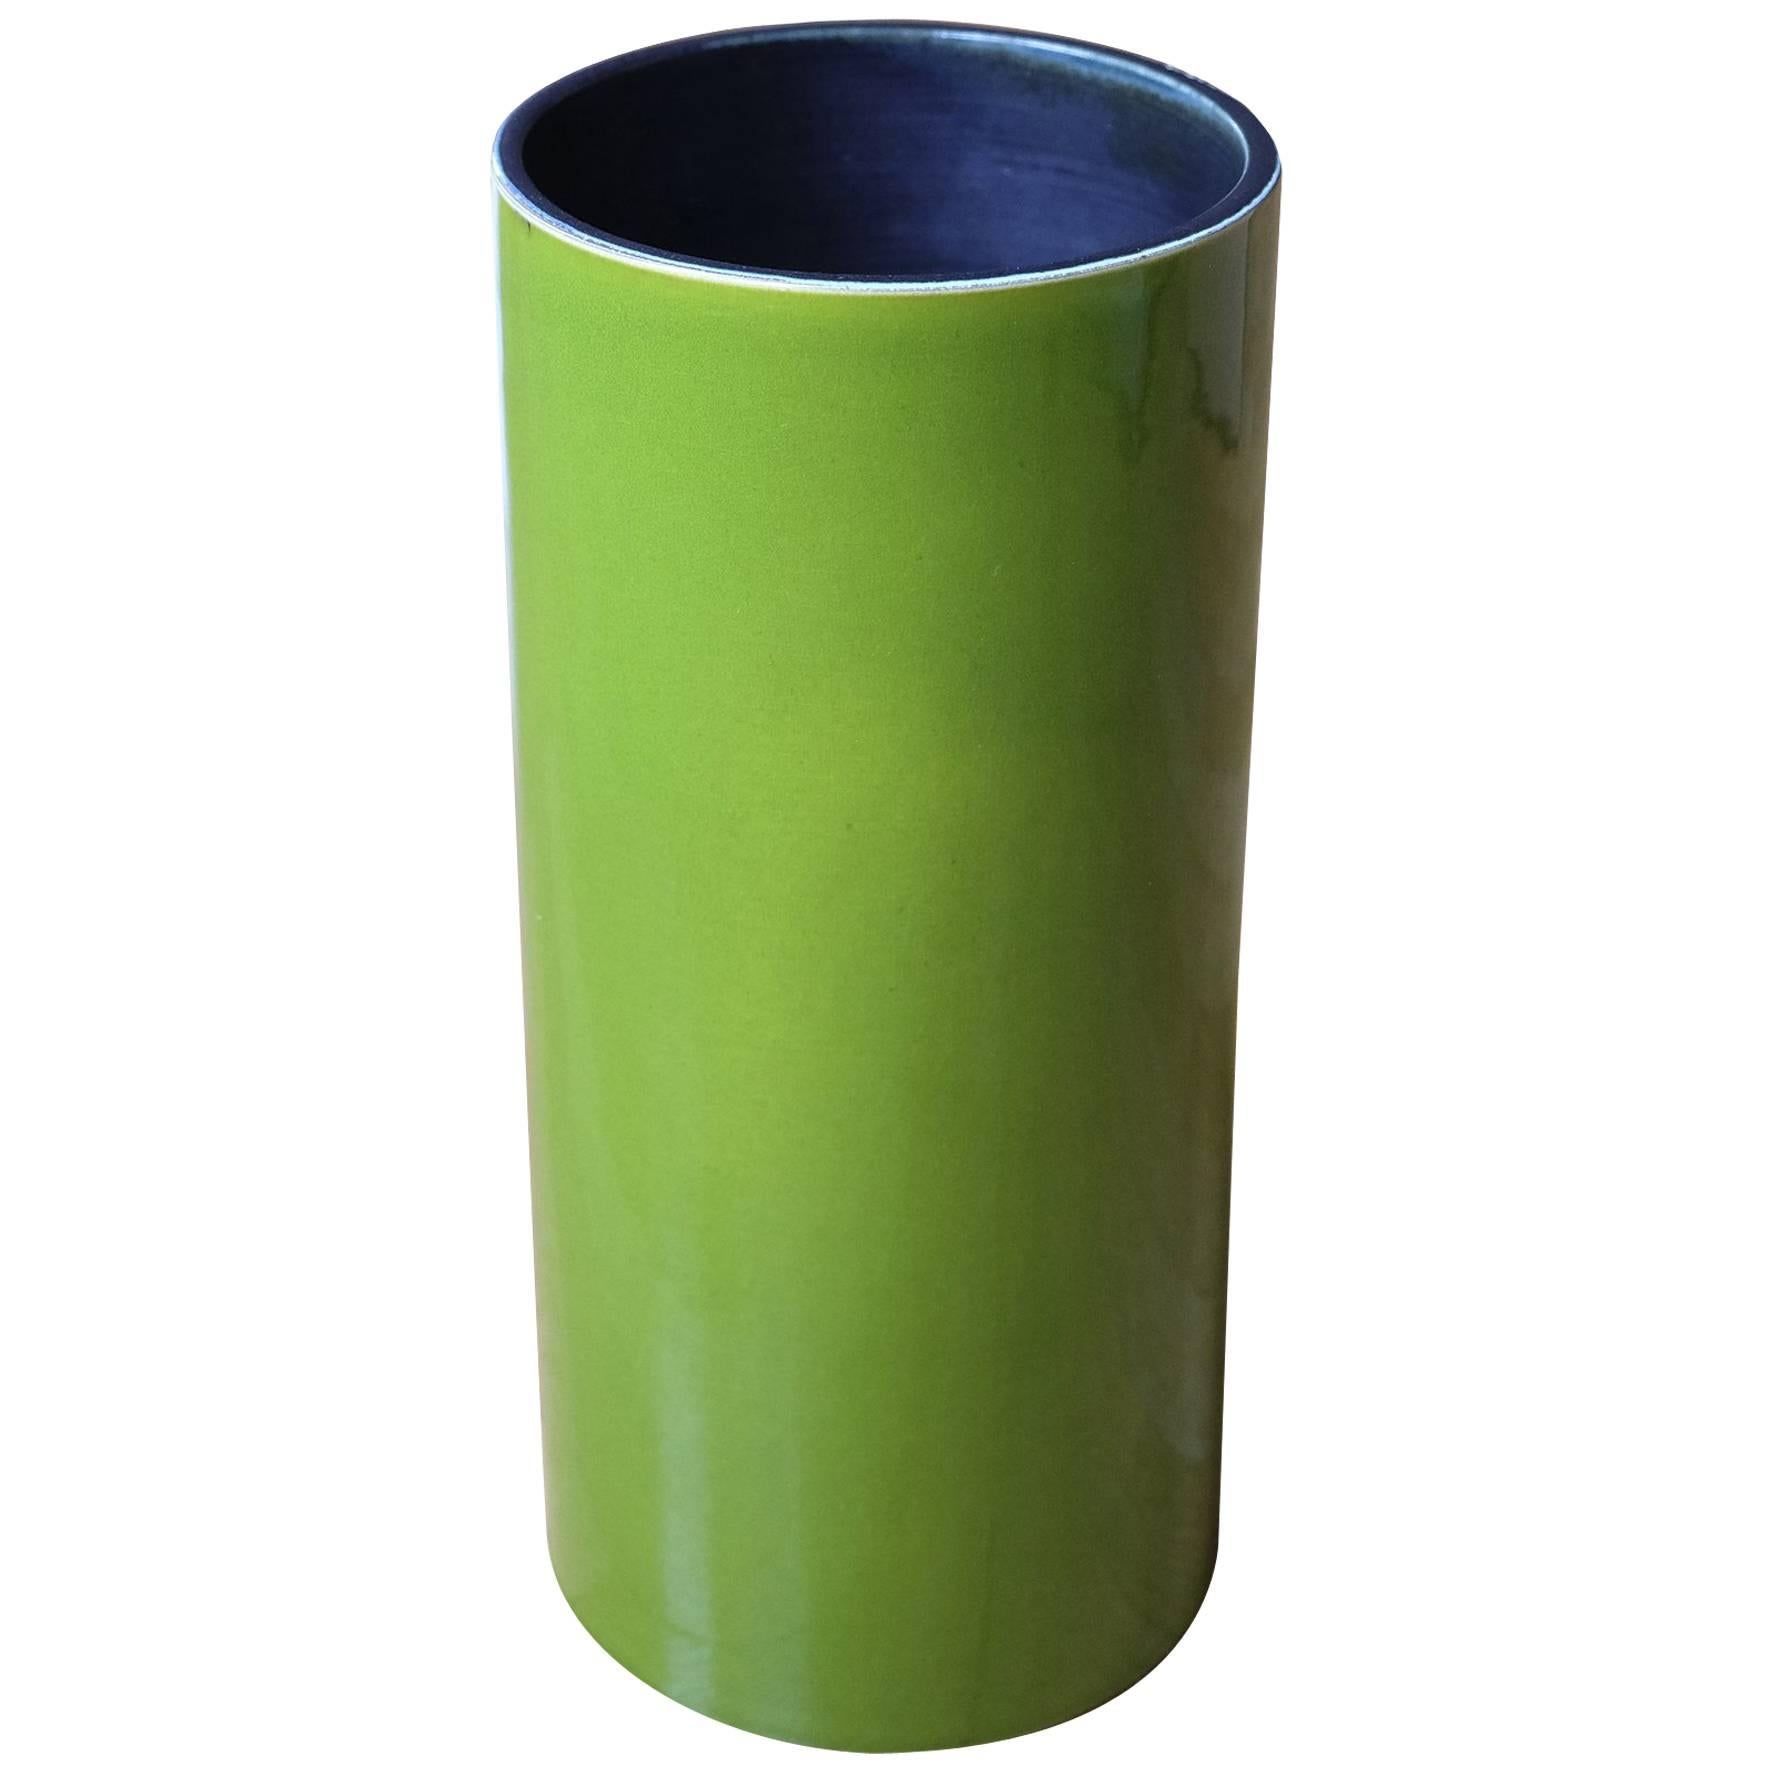 Georges Jouve, a Great "Cylinder" Vase, circa 1960